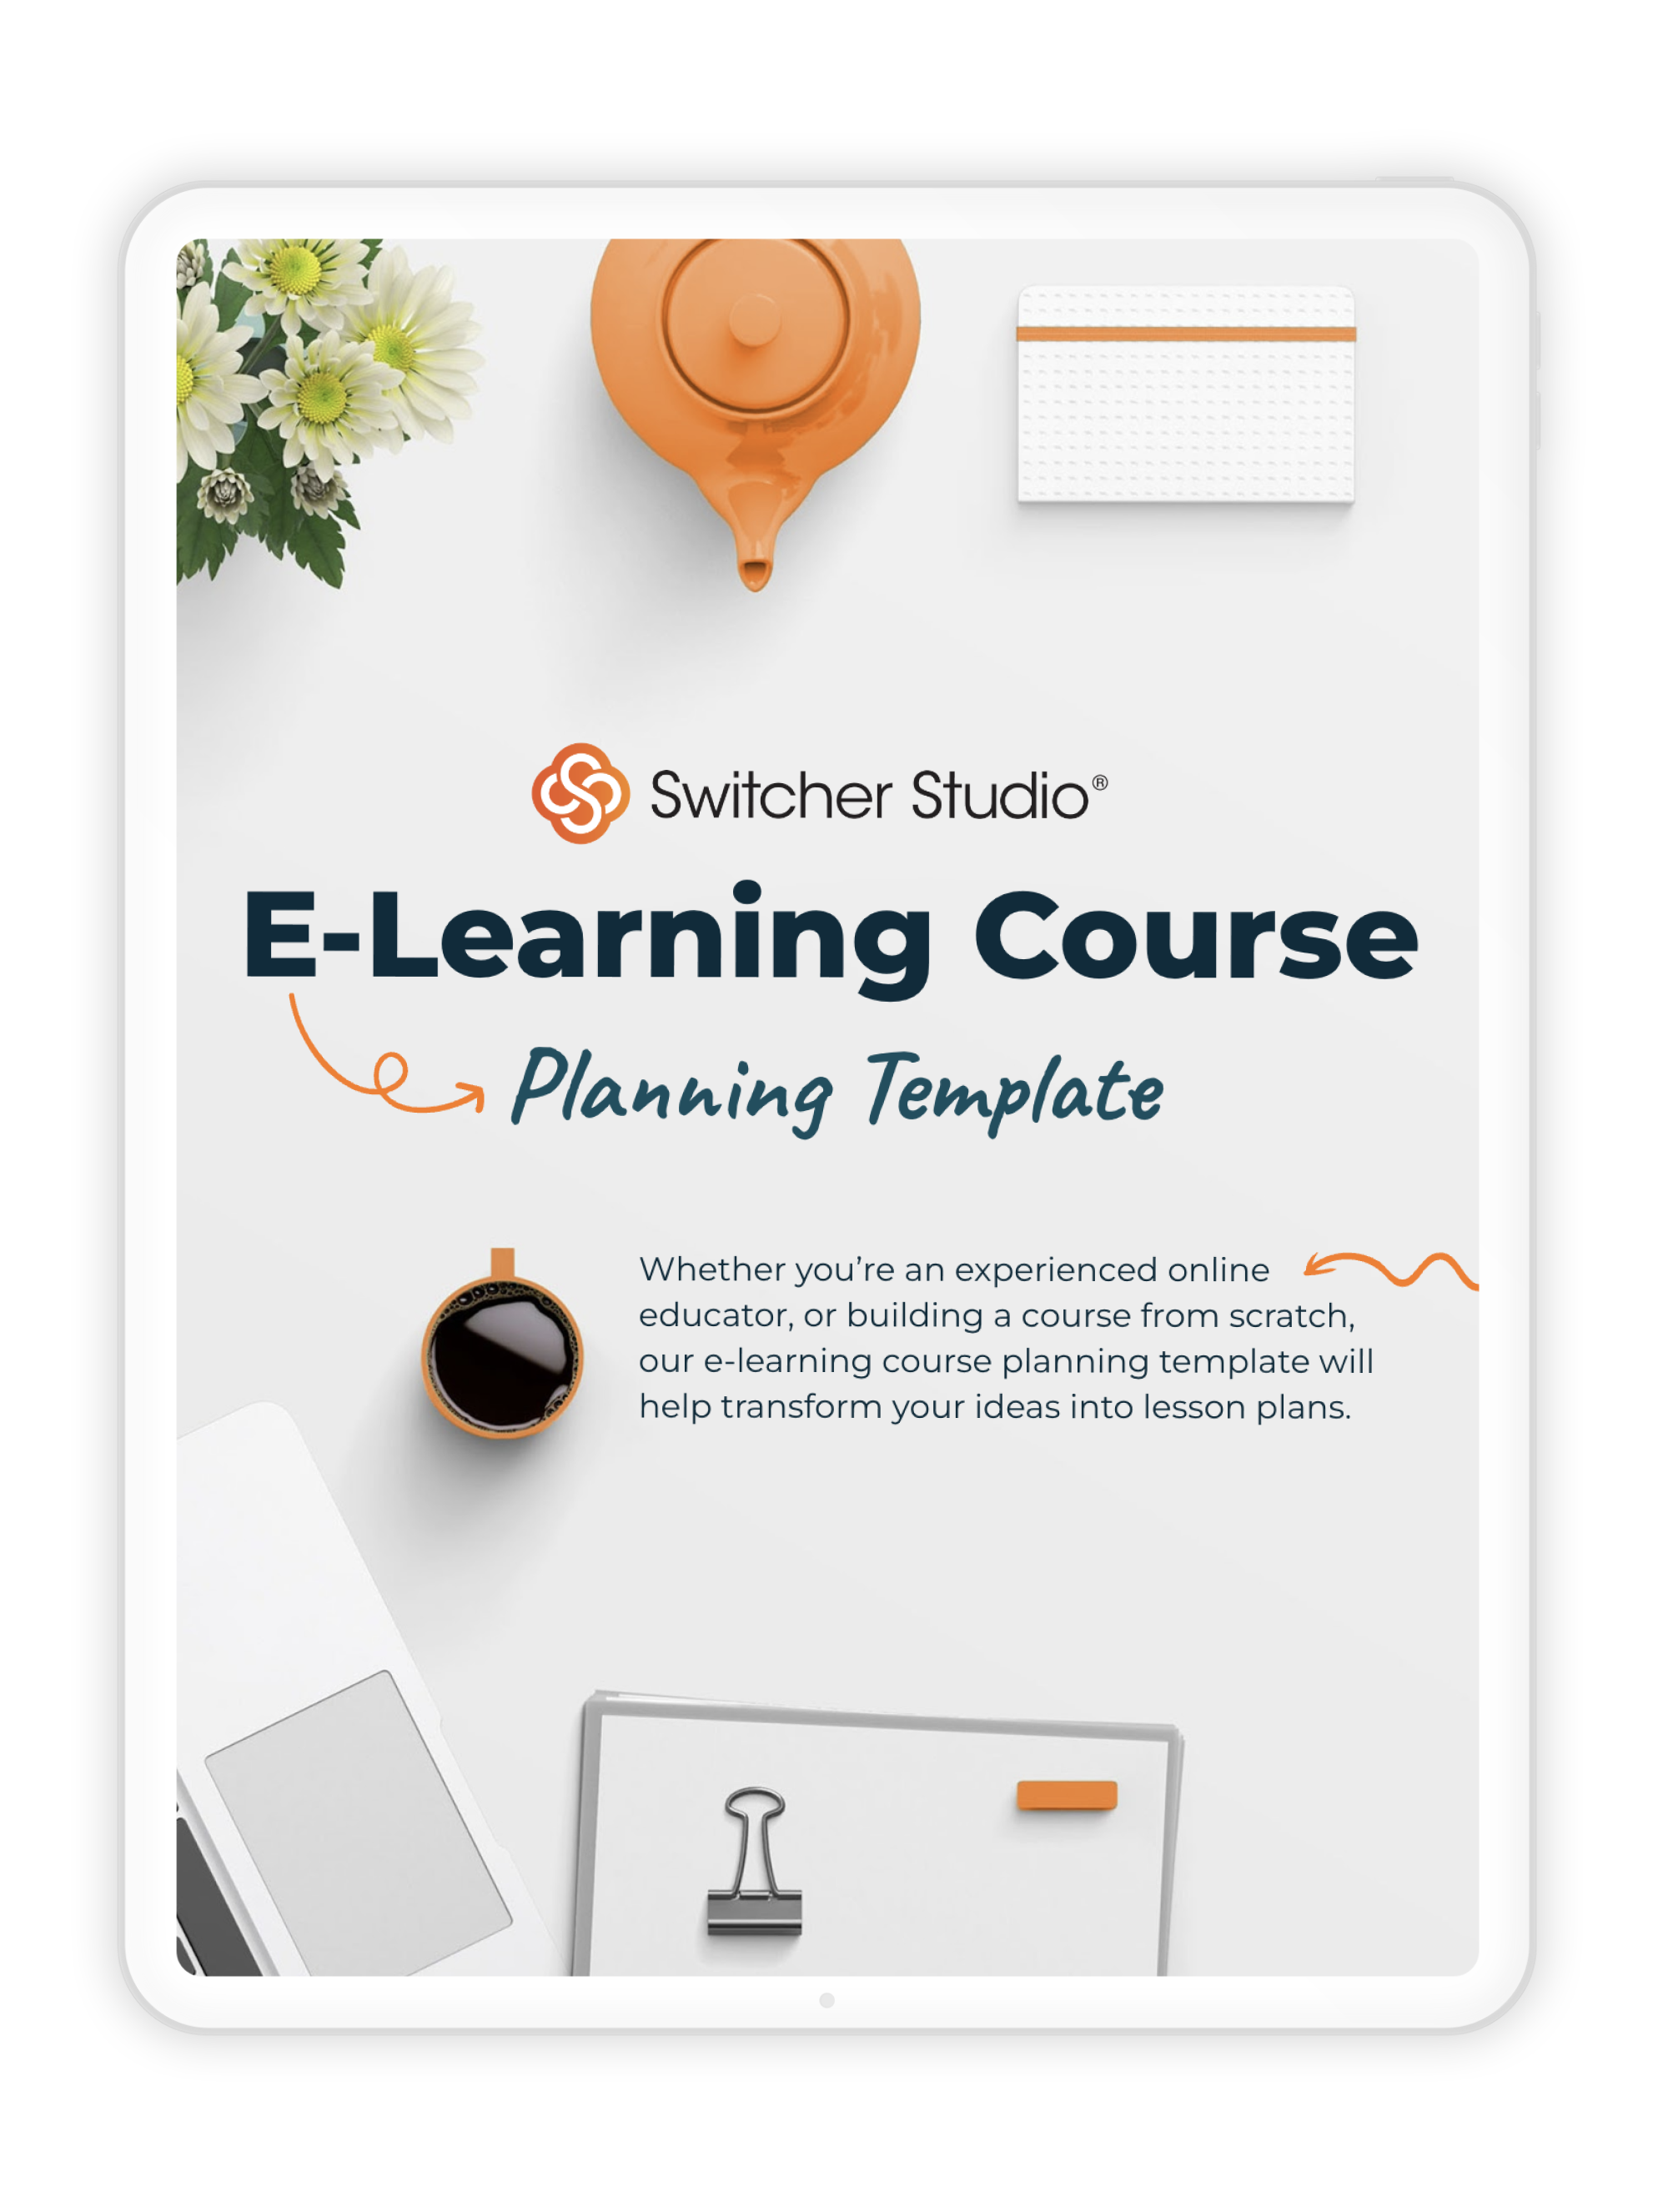 Lesson - eLearning Learning